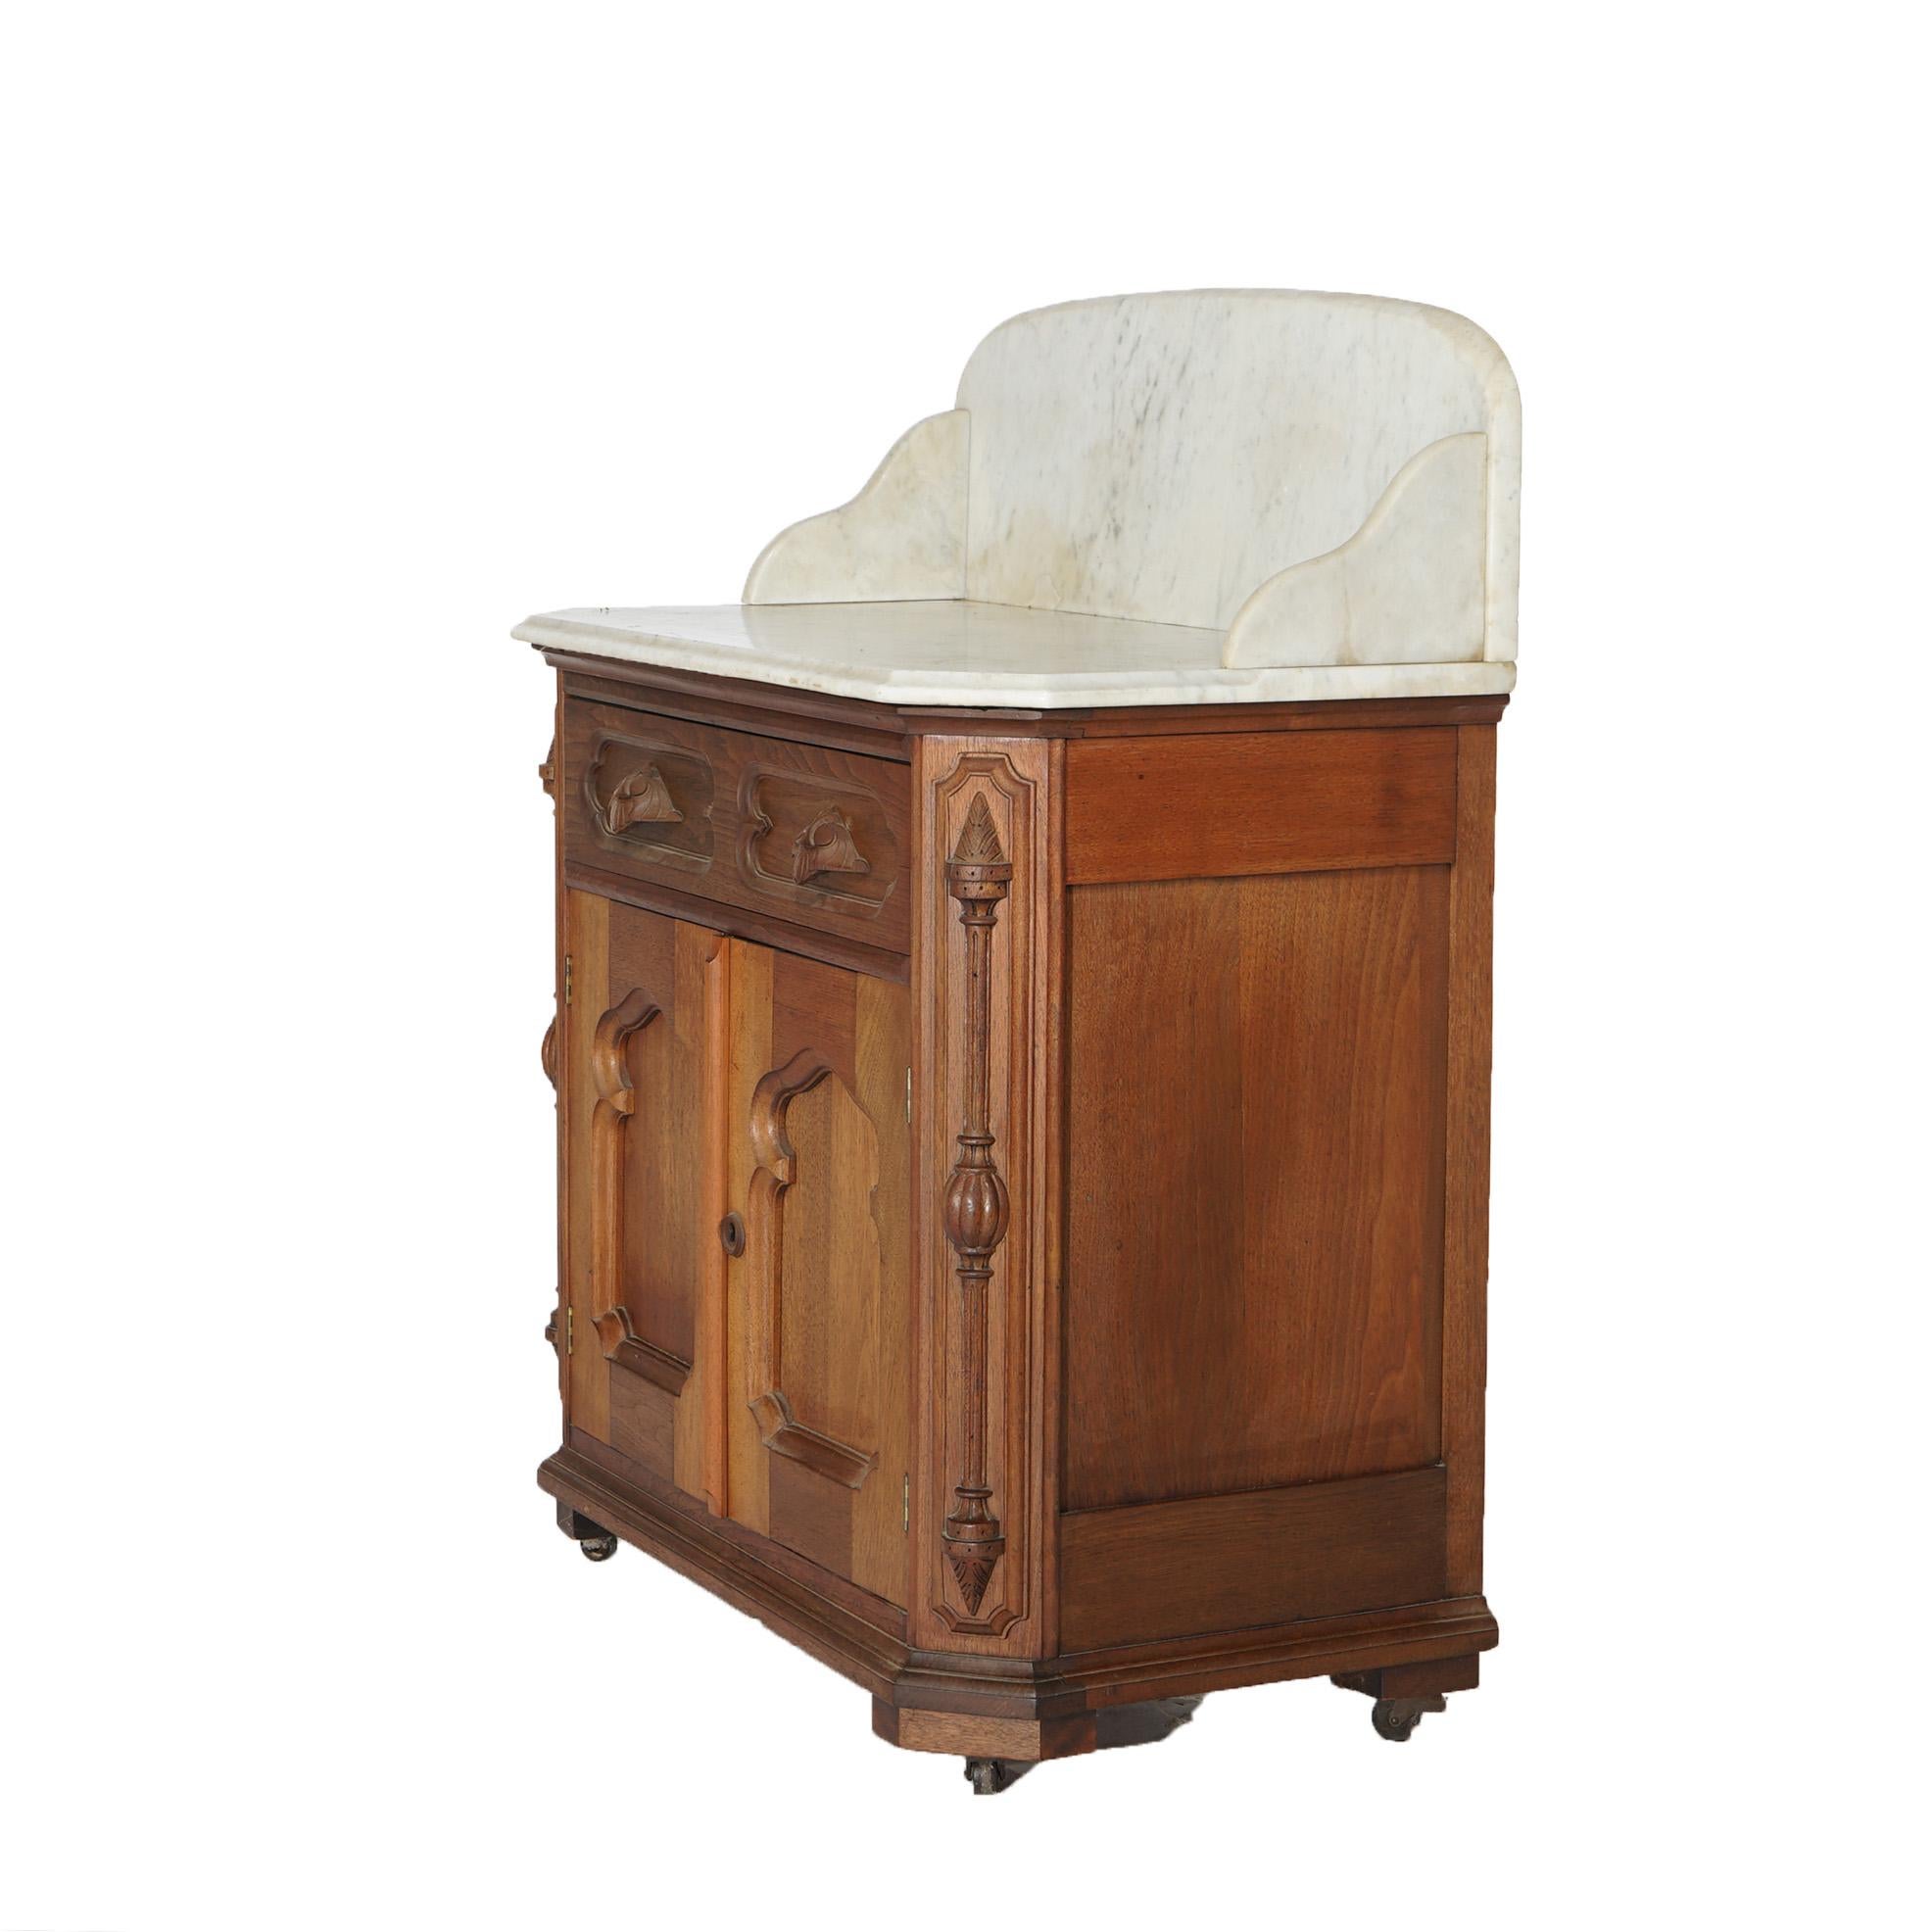 antique face wash stand